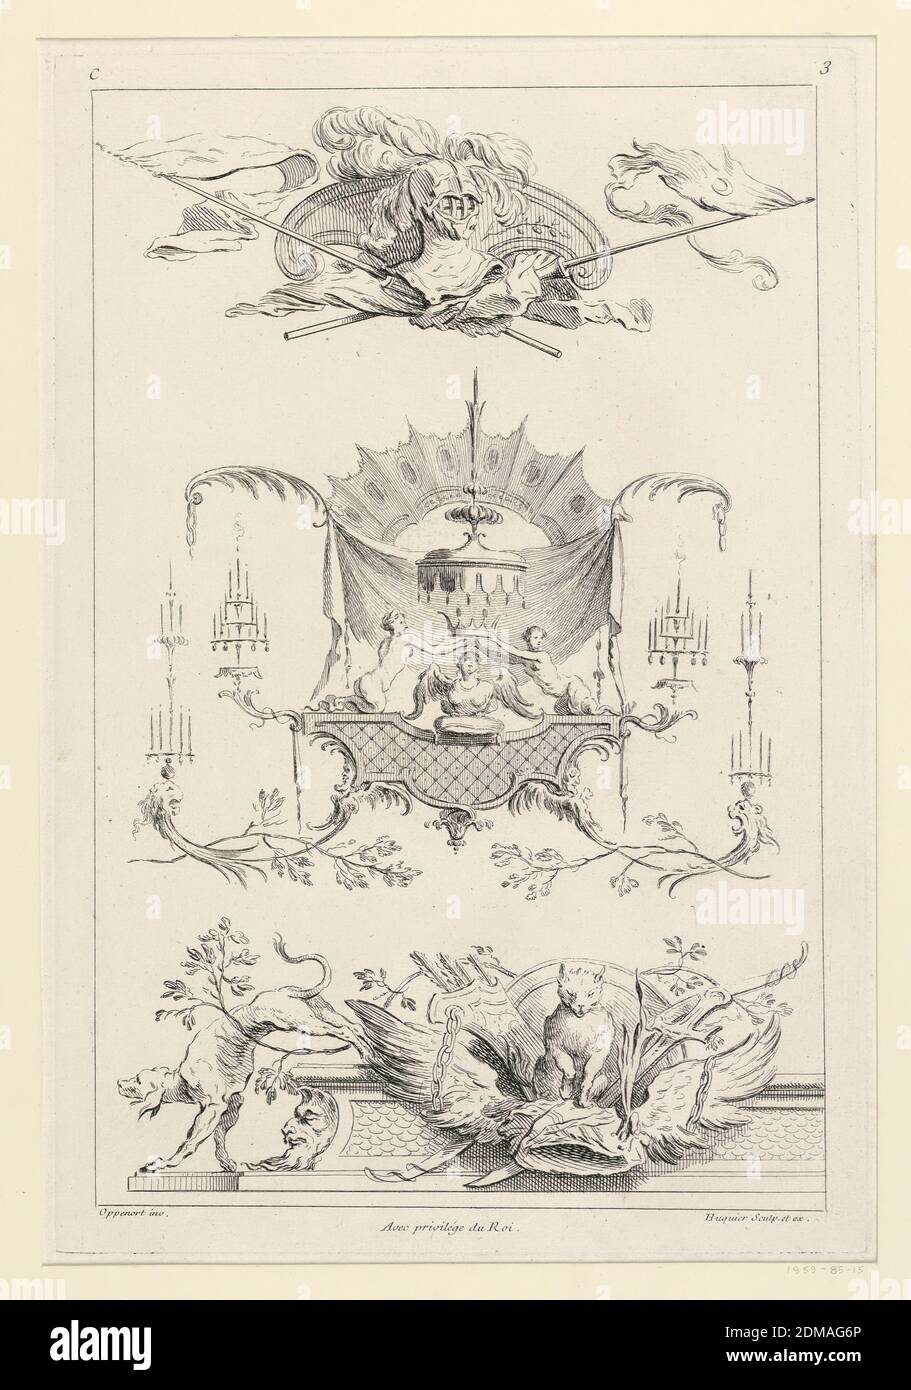 Page Three from 'Toisieme Livre Contenant Des Frises ou Paneaux en Longueur Inventés Par G. M. Oppenort Architecte du Roi et Gravés par Huquier', Gilles-Marie Oppenord, French, 1672–1742, Gabriel Huquier, French, 1695–1772, Etching on paper, Three different ornamental compositions in sequence. The first: military trophies; second: derived from grotesque with central figures: two women crowning a winged bust. The third: two dogs on a pedestal among grotesque ornaments. Inscribed, upper left: 'C'; upper right: '3'; lower left: 'Oppenort inv.'; lower right: 'Huquier sculp. et ex.' Stock Photo